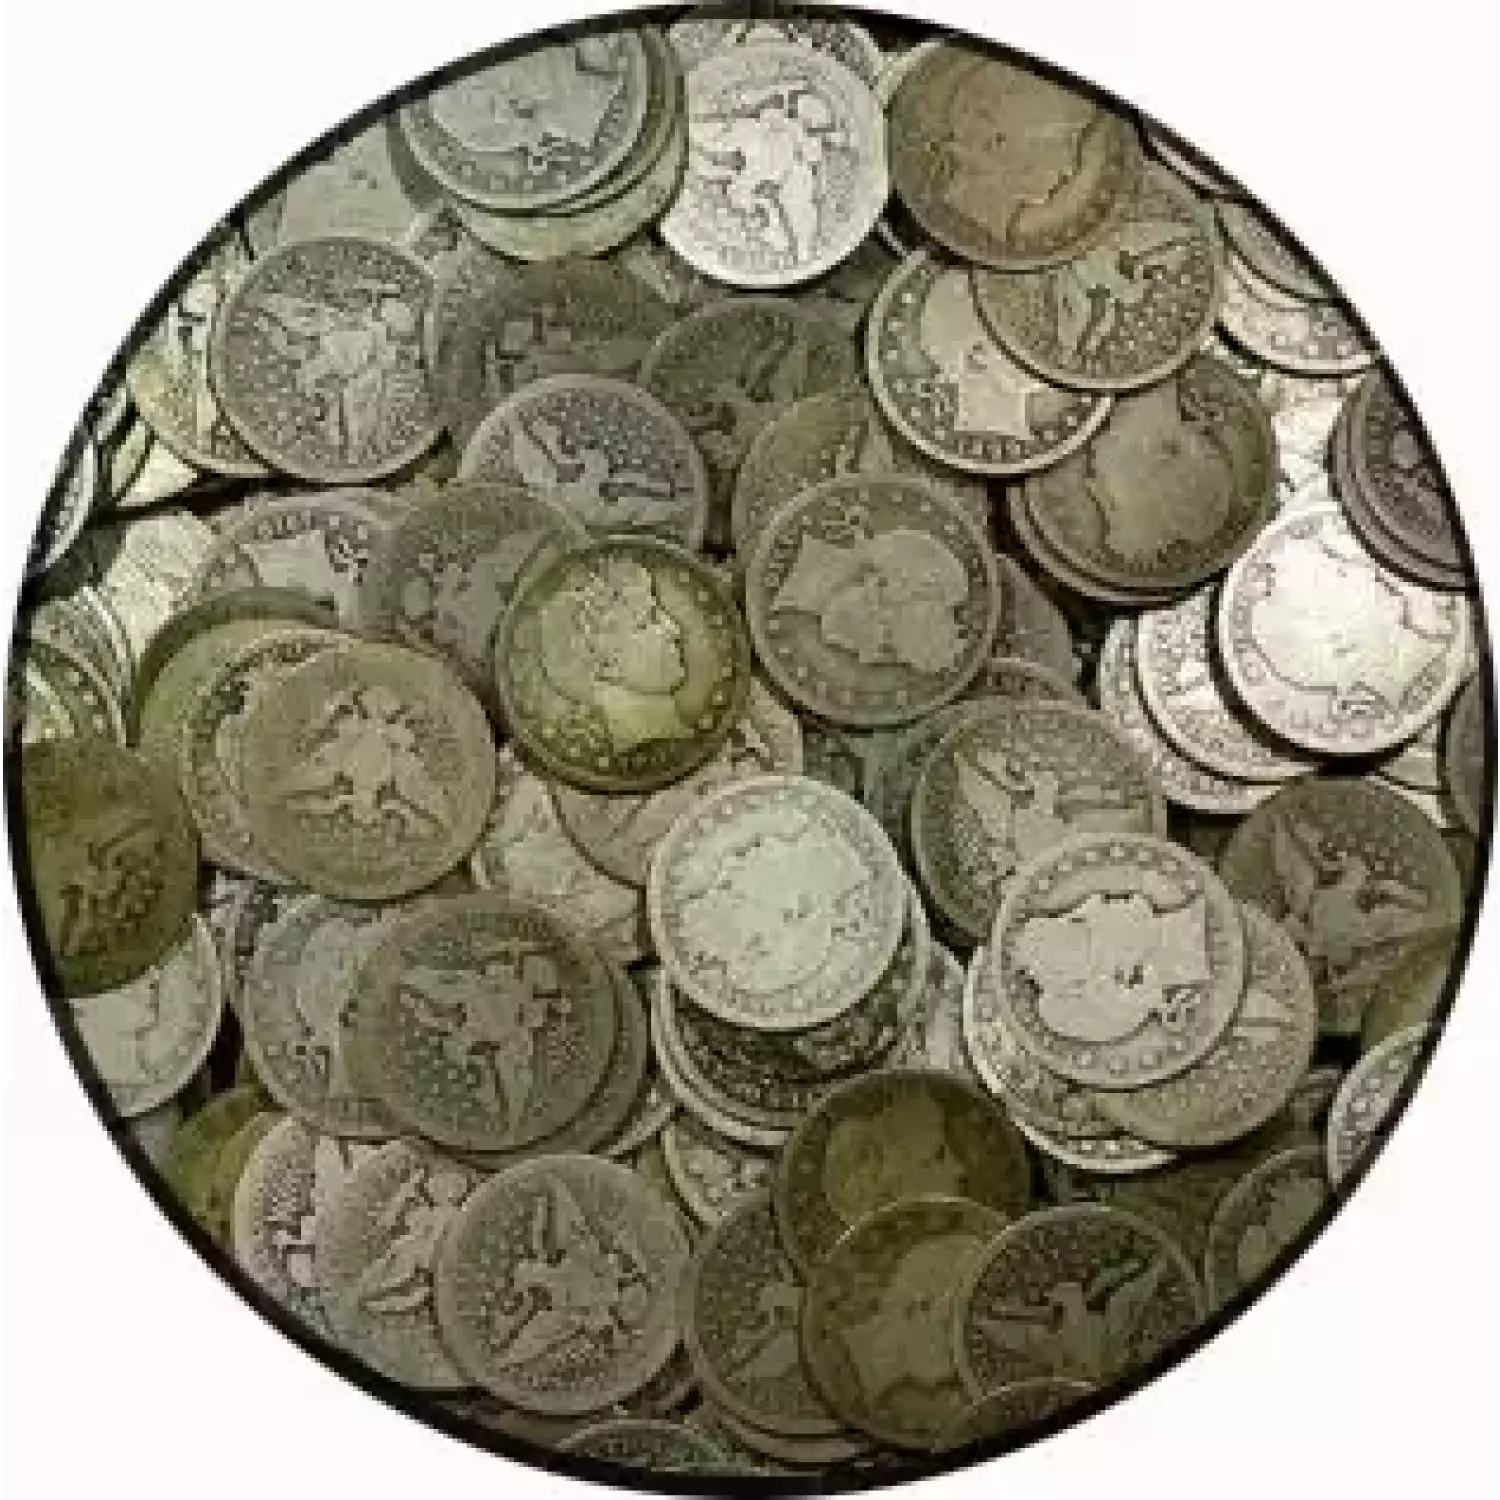 US 90% Barber Coinage - Silver $1 Face